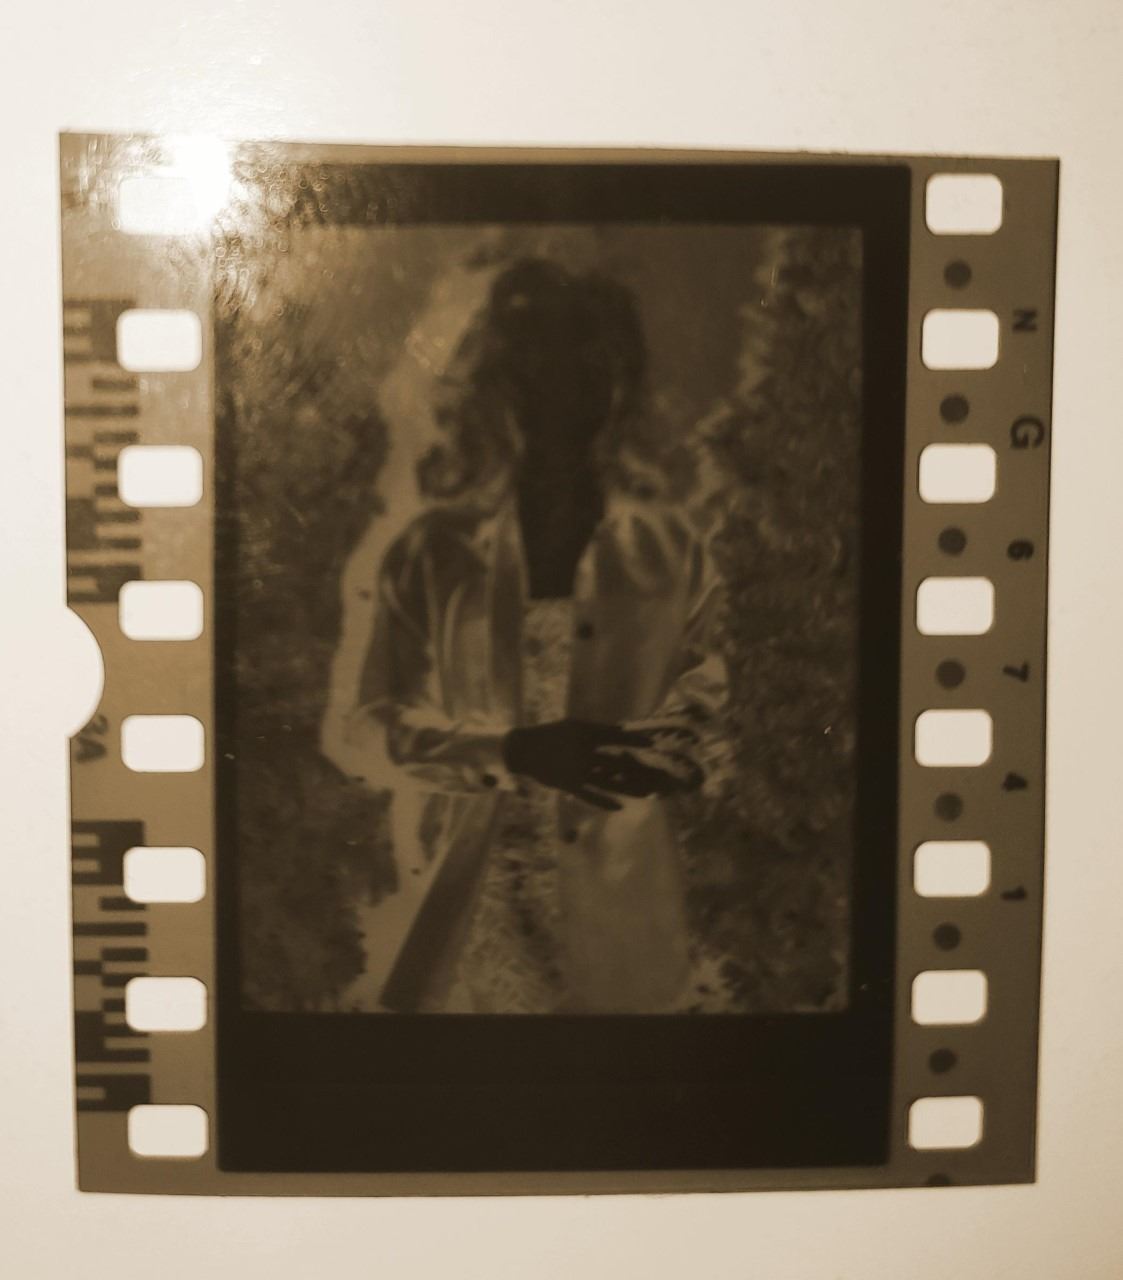 A late 1980s negative of Brooke Shields and a further large photo of Brooke Shields by Richard - Image 2 of 2